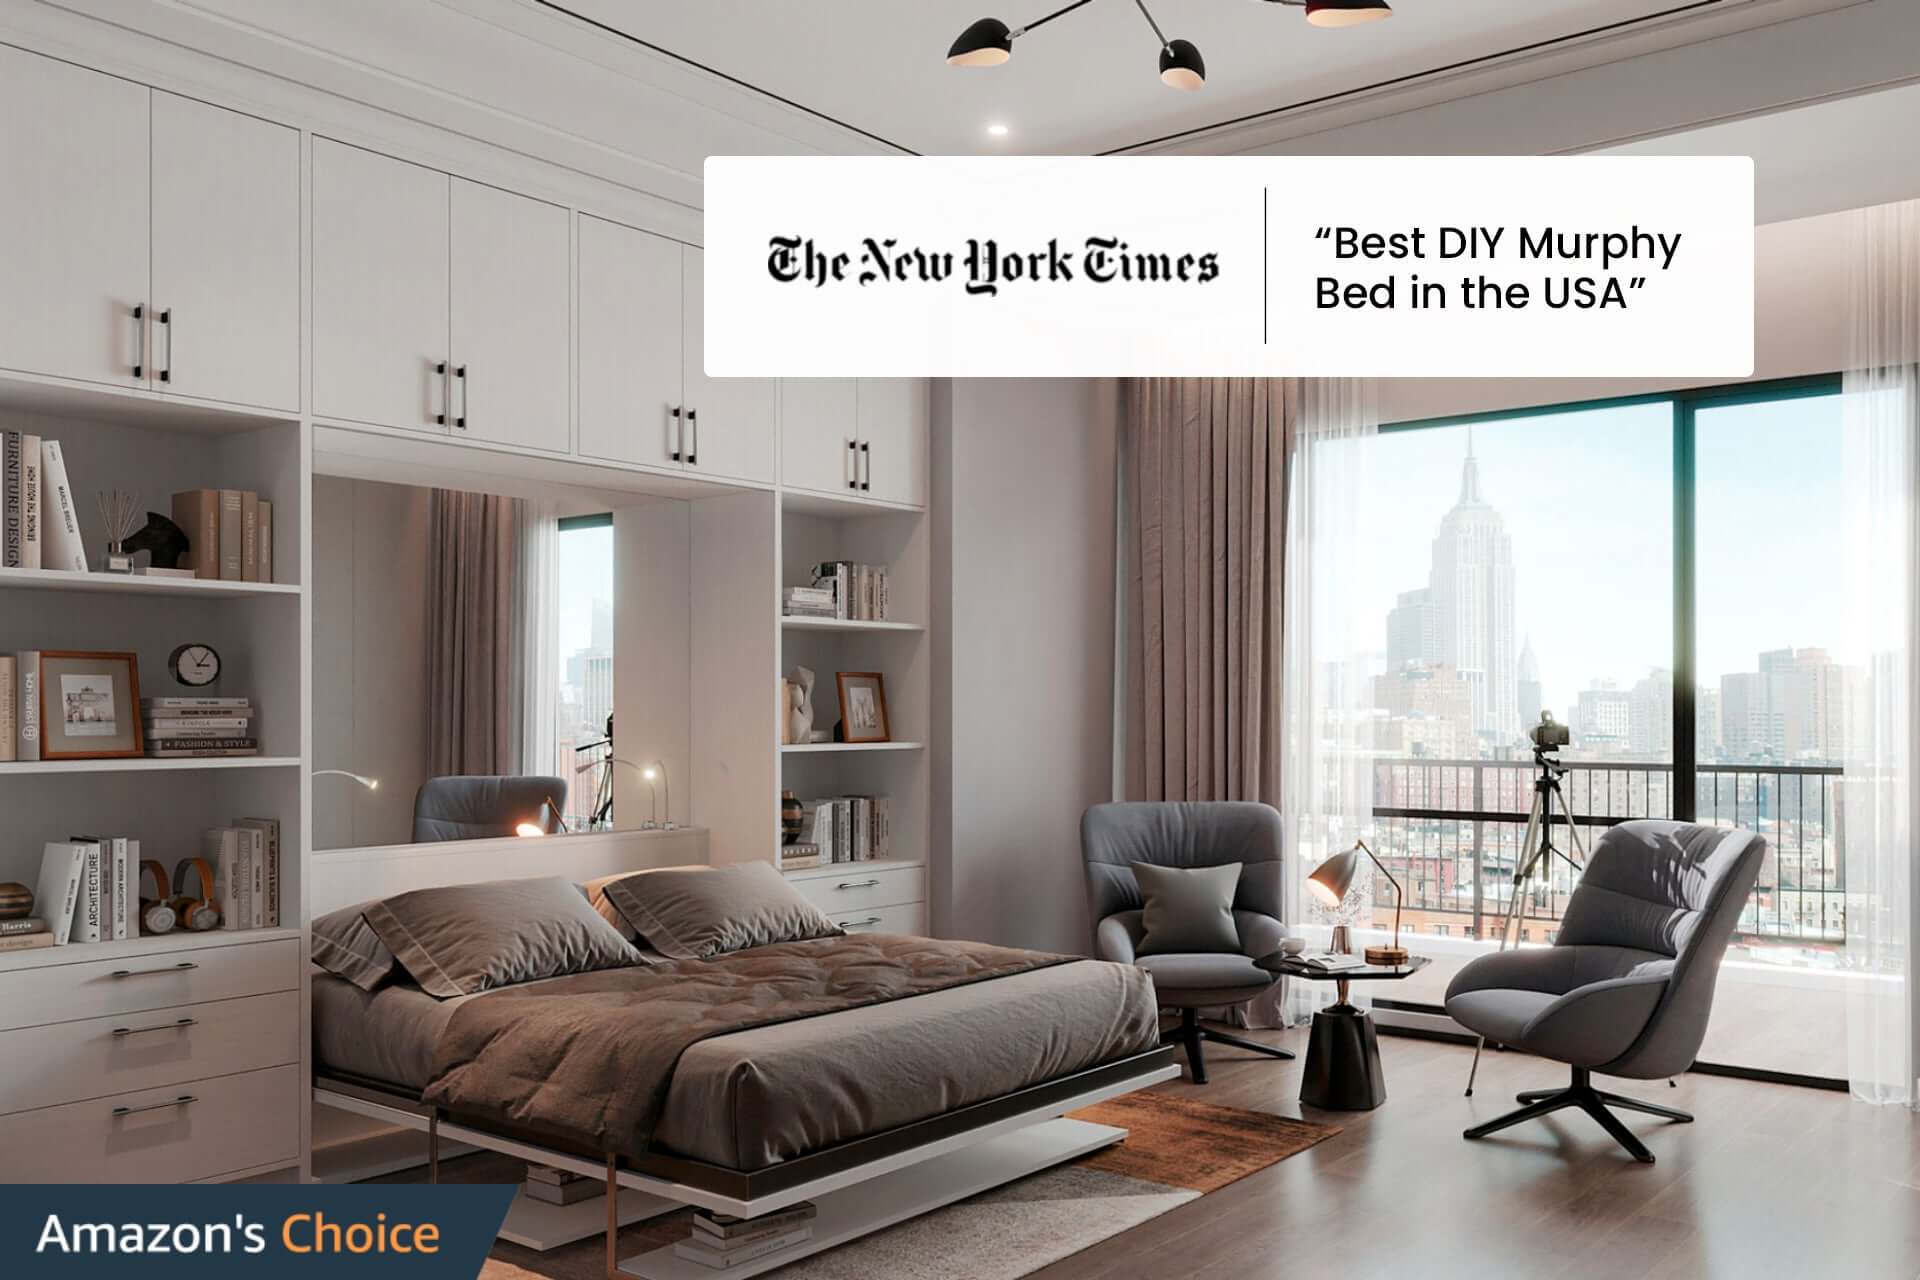 This Home Office Has a Secret Press Article The New York Times